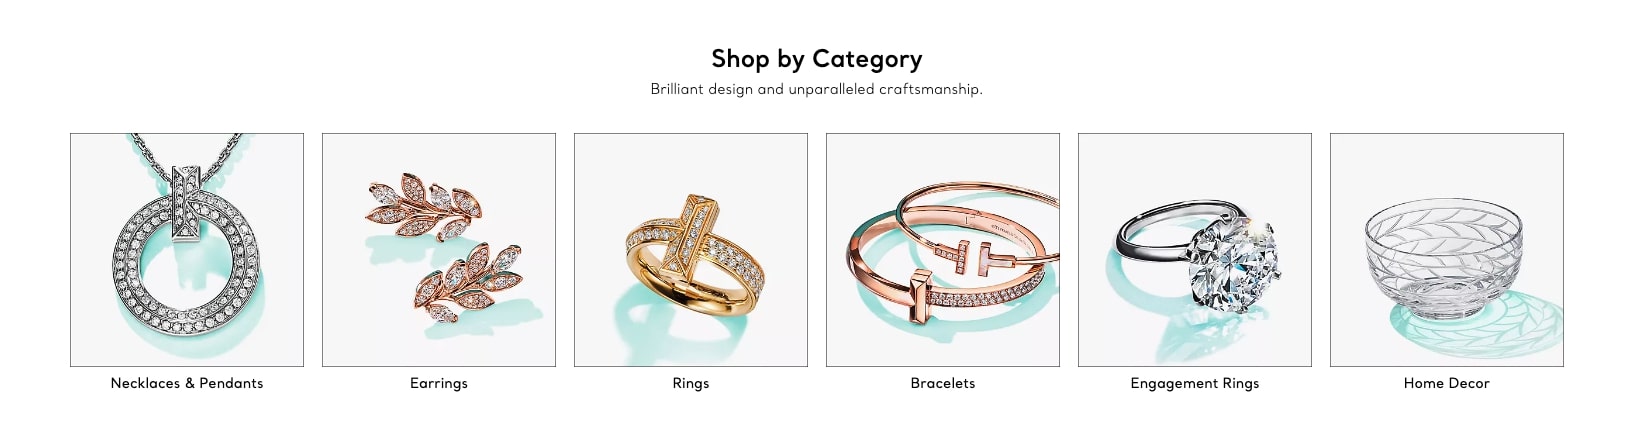 Product images on Tiffany & Co.'s website